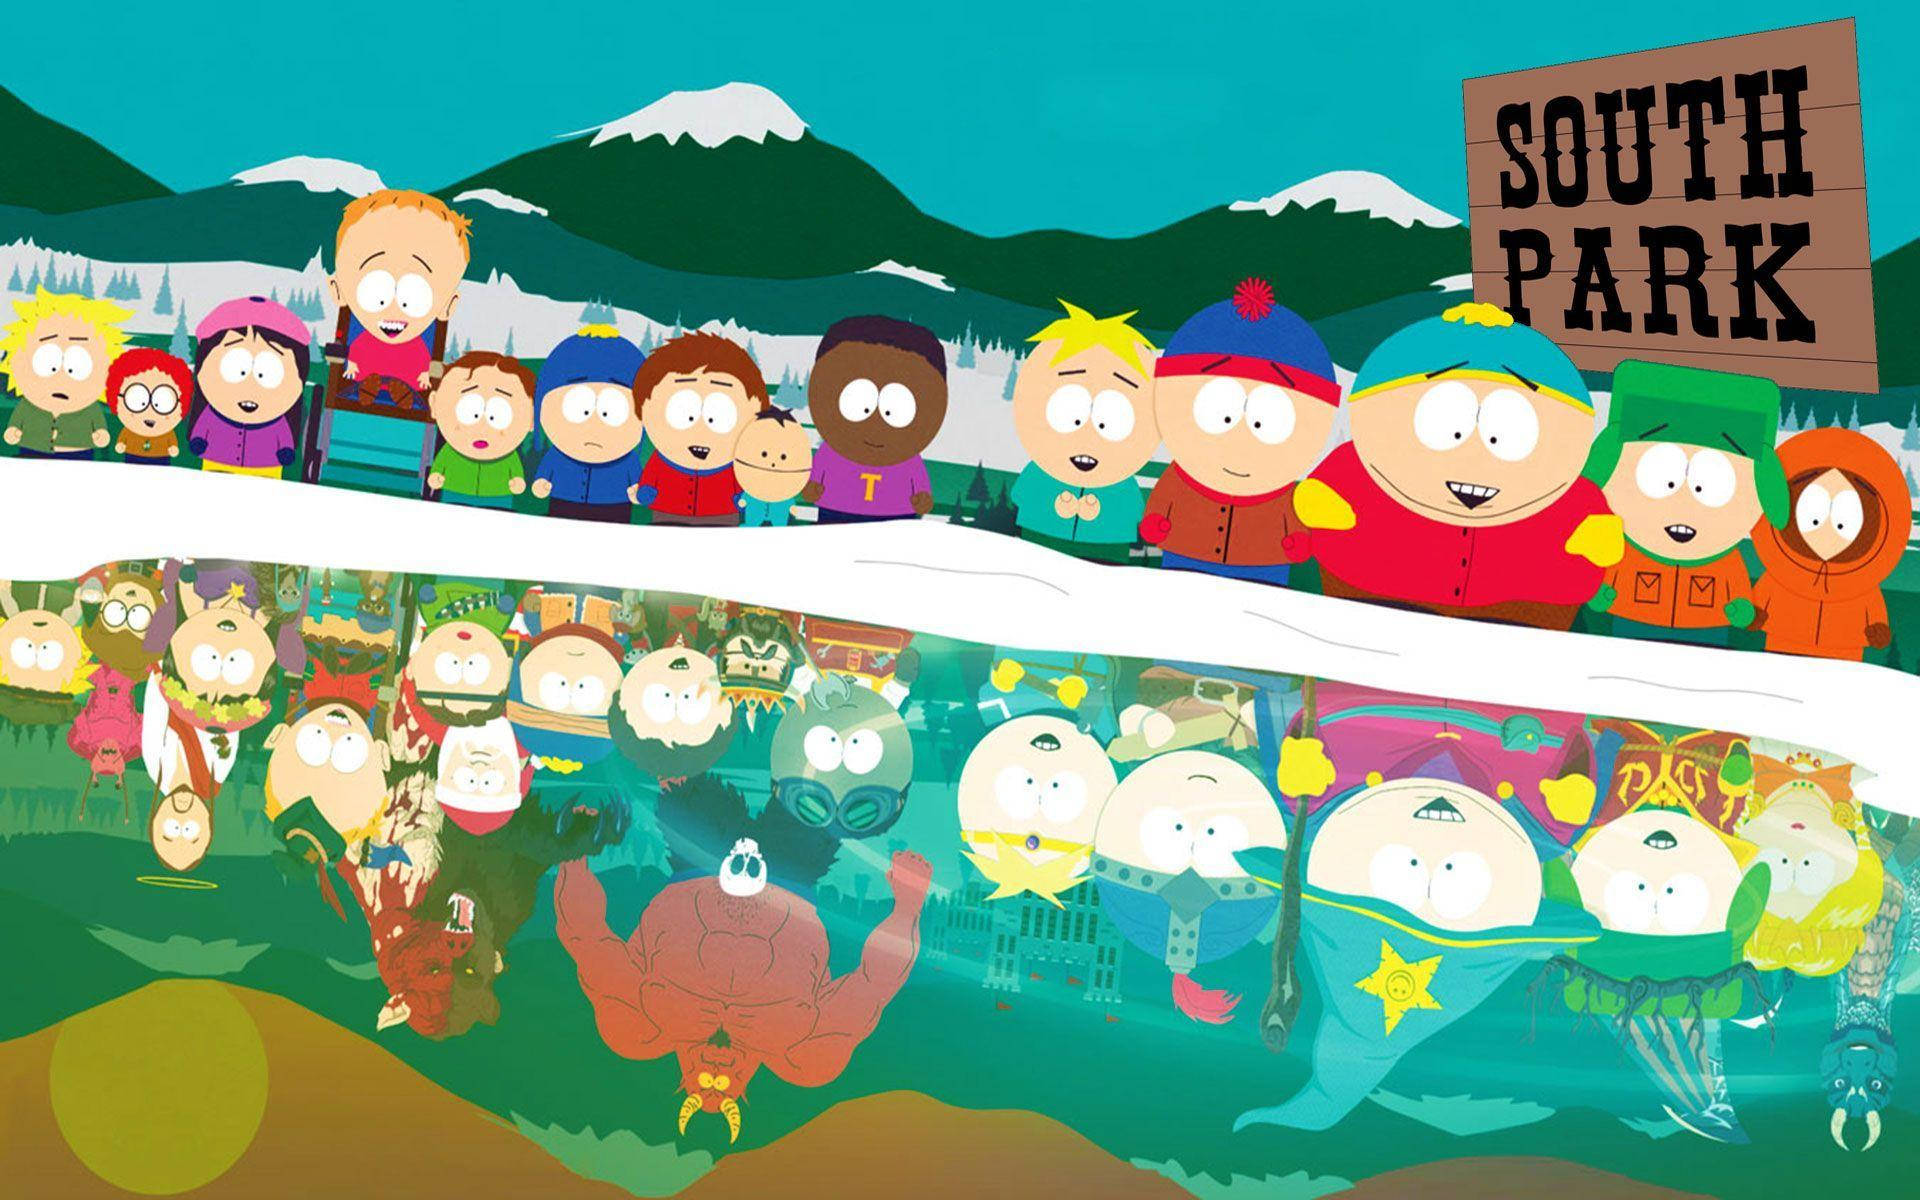 Top 999+ South Park Wallpaper Full HD, 4K✅Free to Use